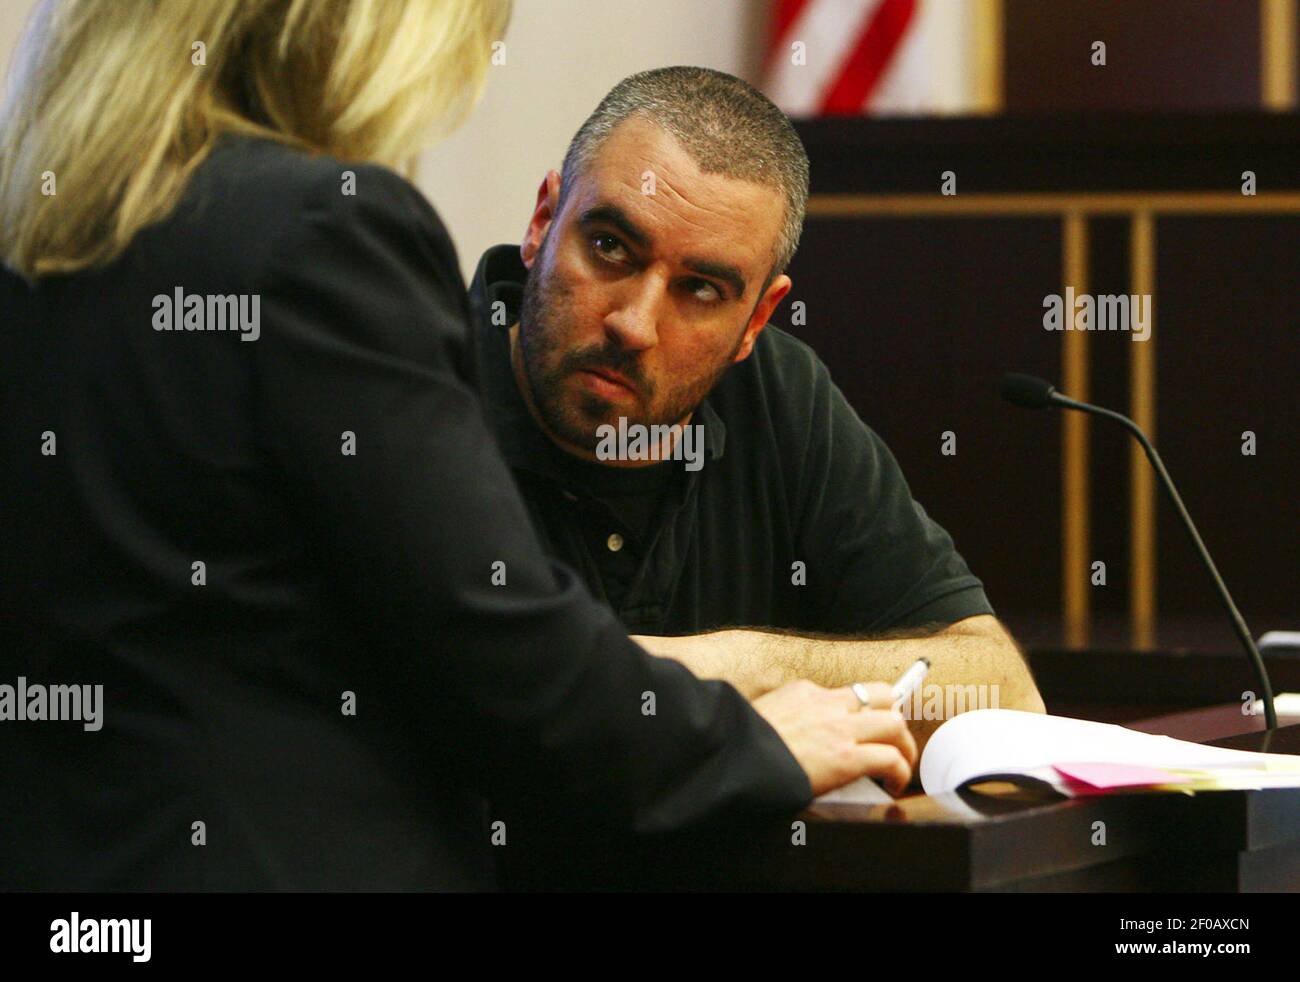 Lee Anthony, brother of Casey Anthony, listens to questions from Florida  Assistant State Attorney Linda Drane Burdick during a hearing at the Orange  County Courthouse in Orlando, Florida, Thursday, March 3, 2011.